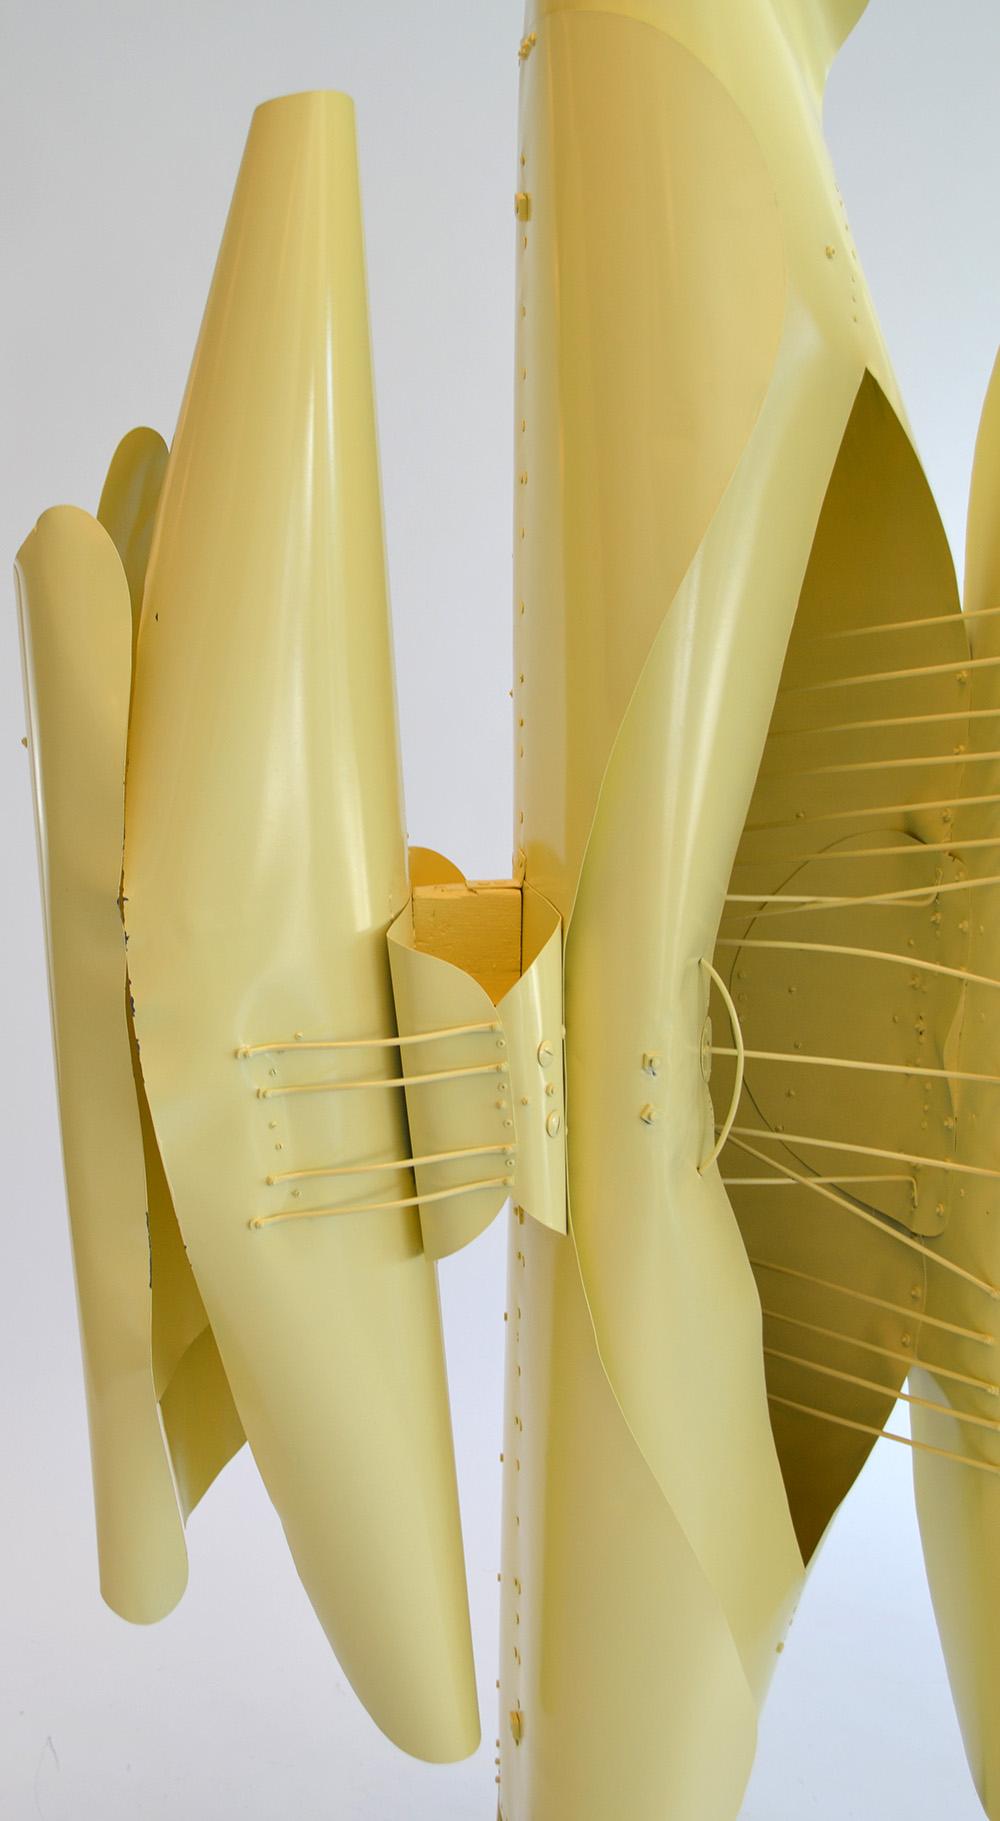 Large abstract folded metal sculpture by Victor Roman (1937-1995) 1970's. Constructed of butter-yellow painted folded metal with Barbara Hepworth-inspired struts and supports on a painted wood base/plinth. Some dings and paint loss. Unsigned. Prov.